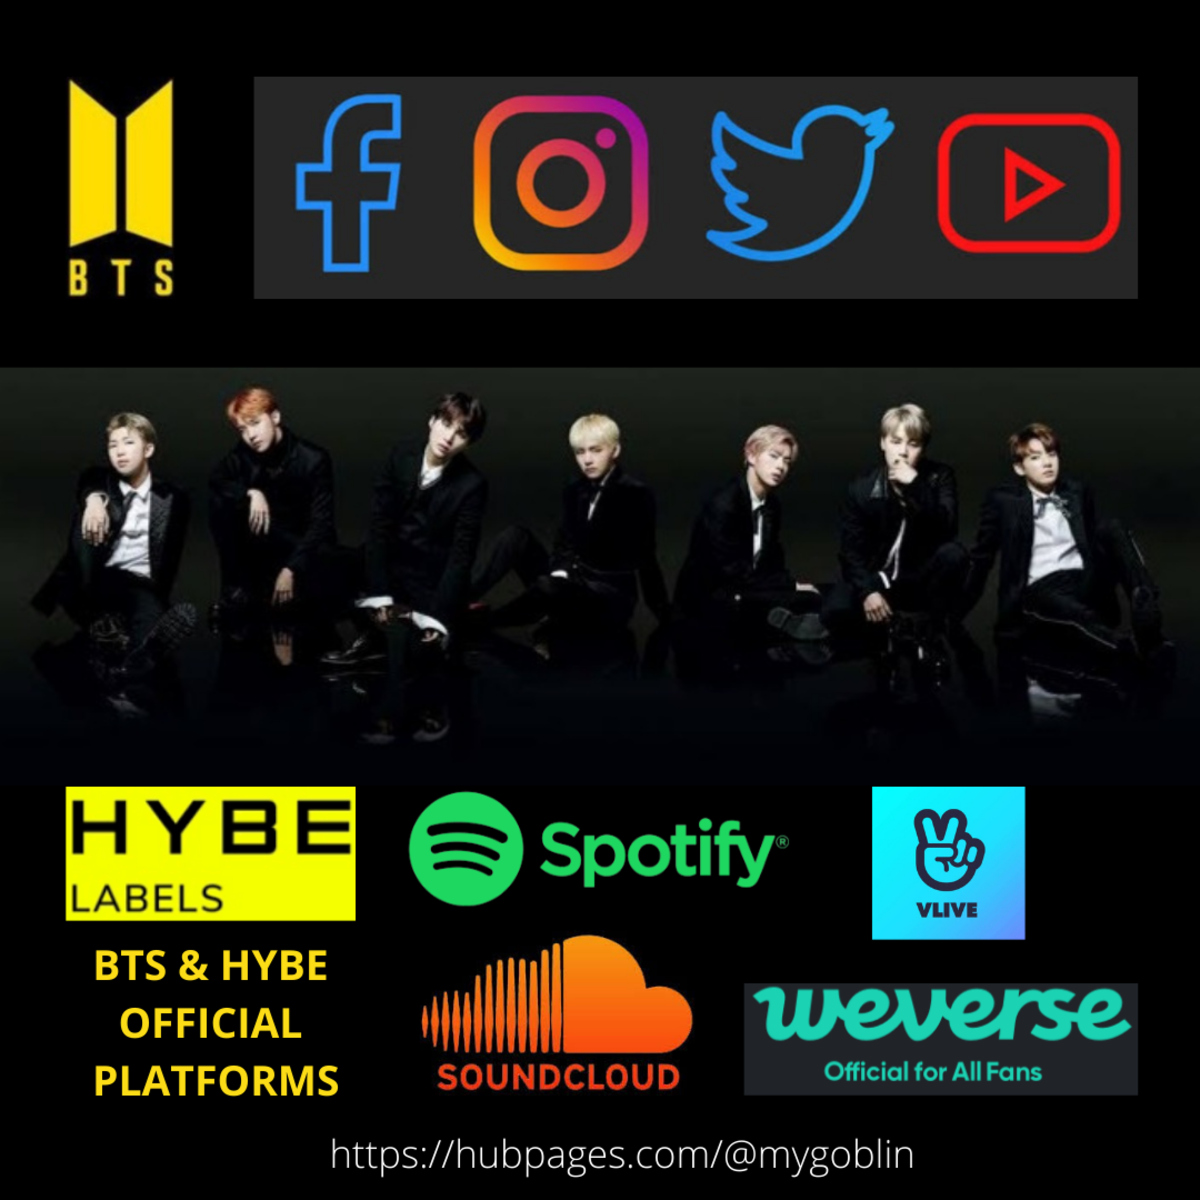 Official BTS Platforms That New ARMYs Should Follow